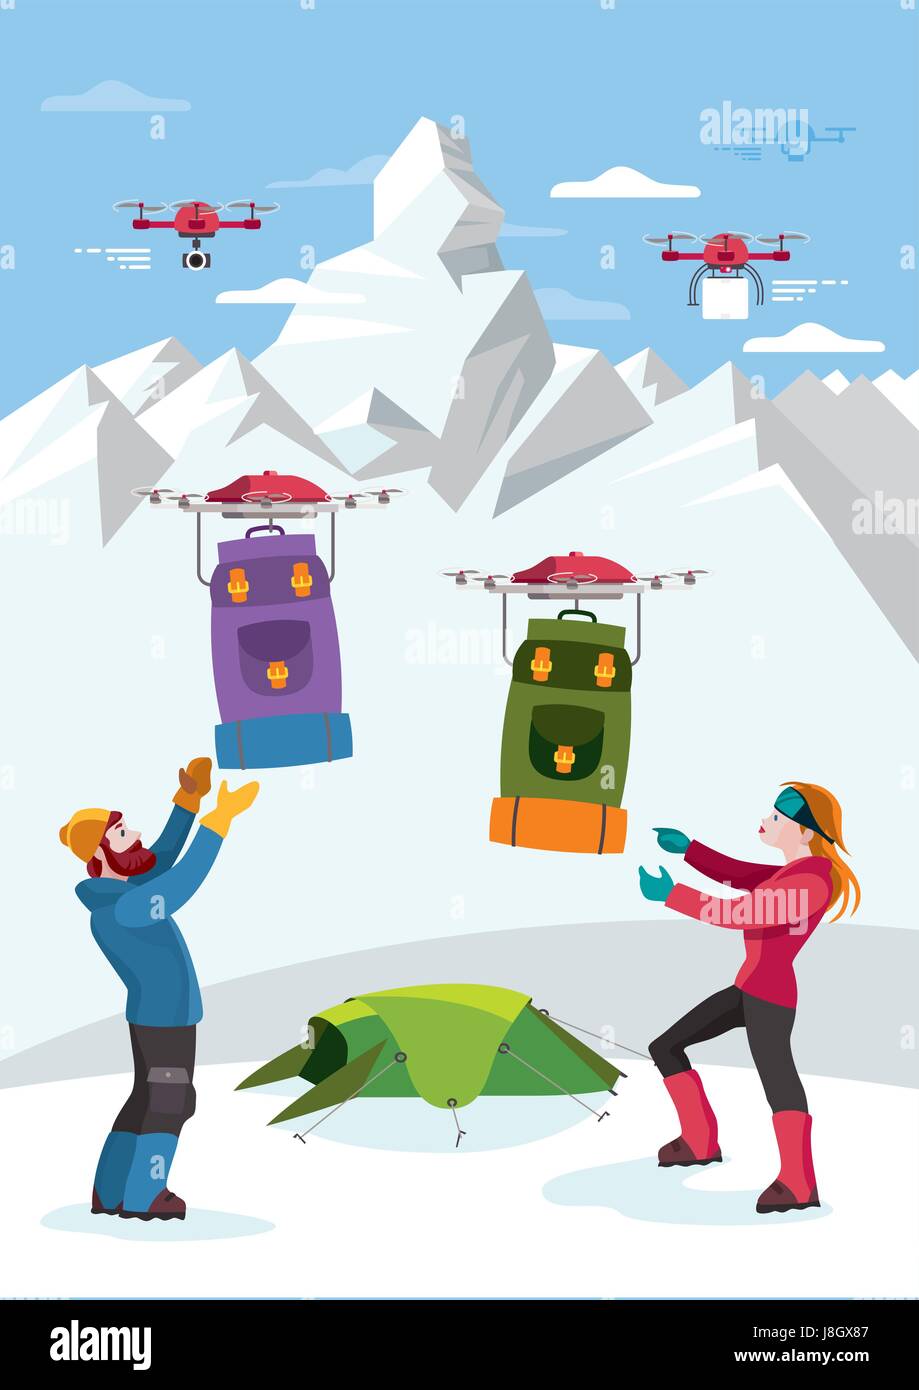 Climbers Receive Backpacks by Drones. Another drone is prepared to film their climb. Stock Vector